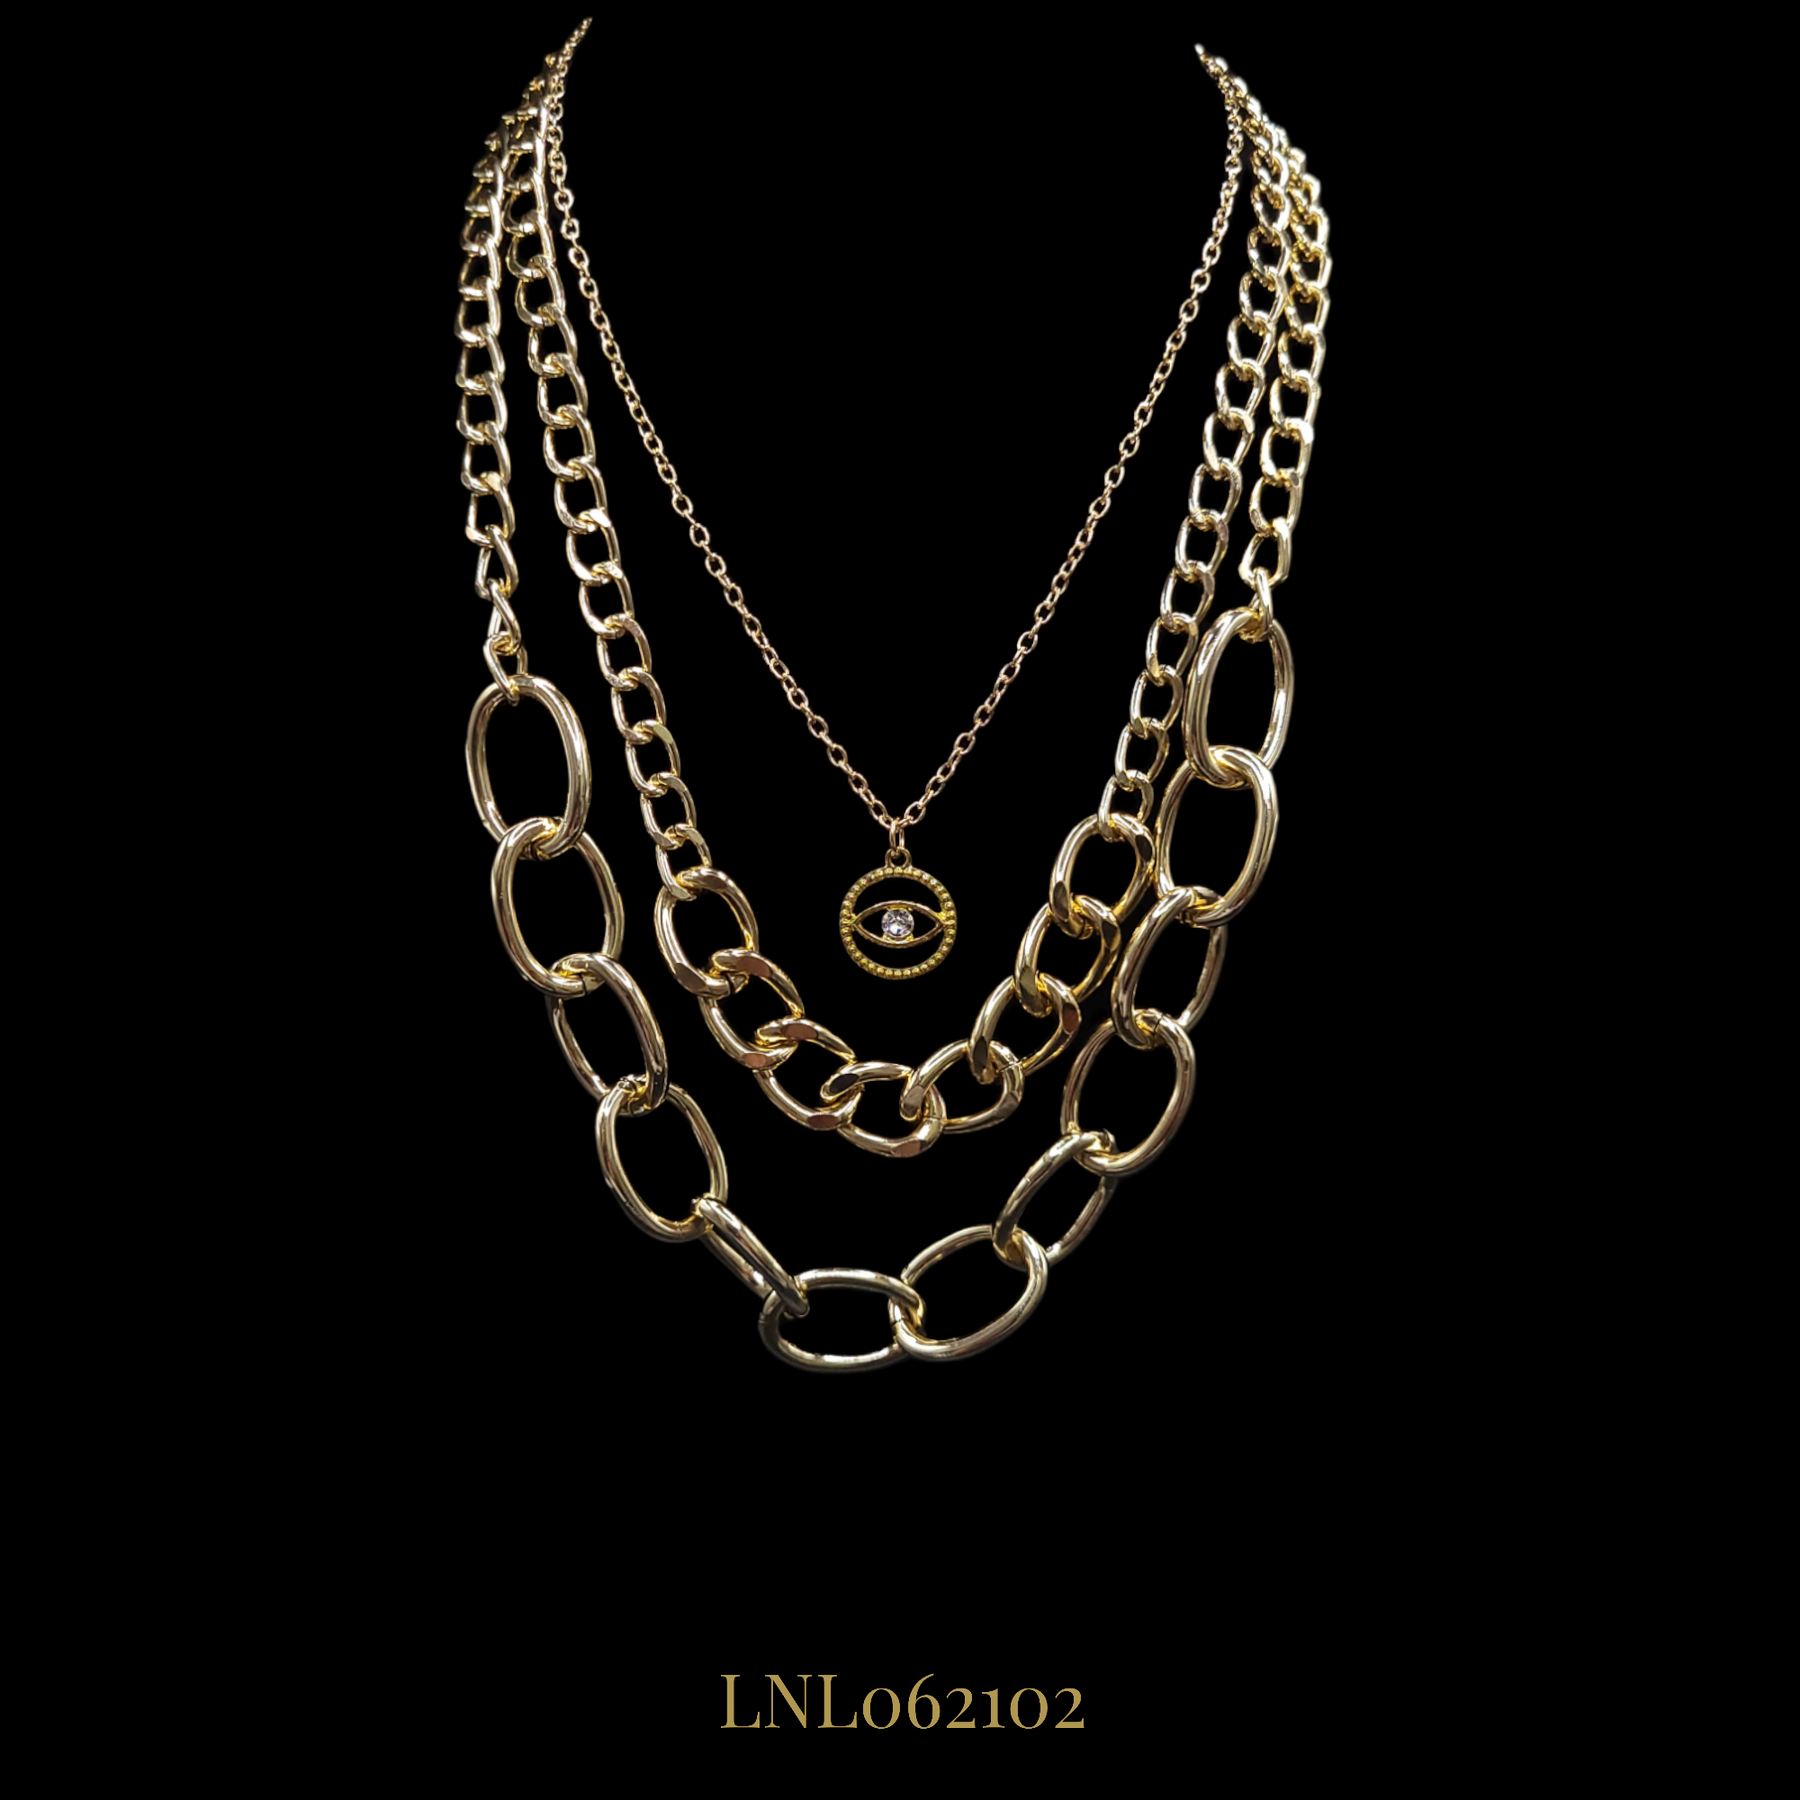 EYE CATCHING GOLD TONE NECKLACE